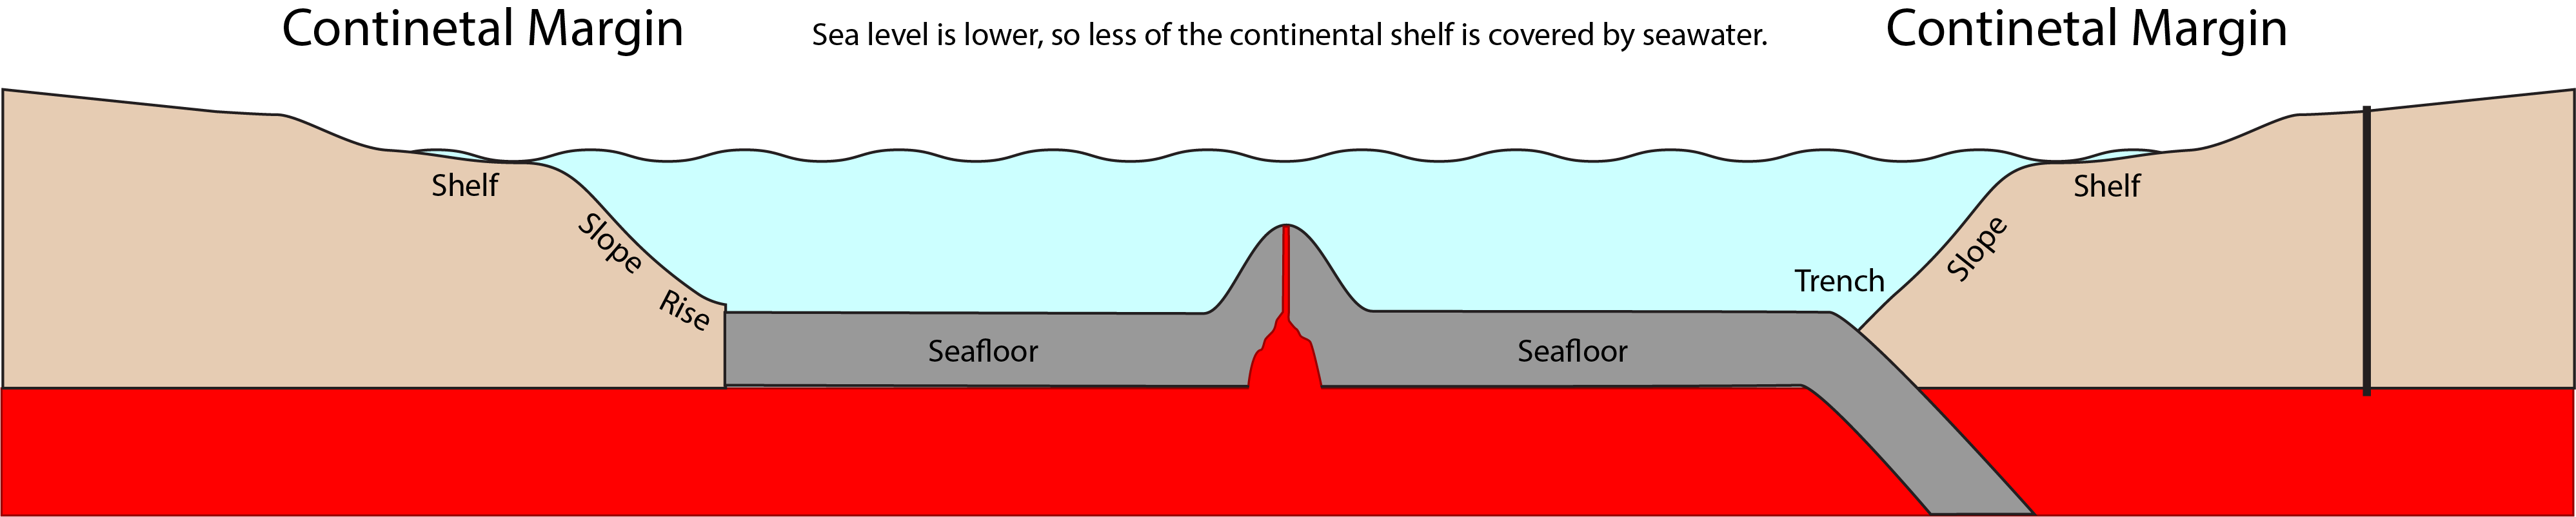 Profile extending from the continental margin (left), dropping off to the deep sea floor, where there is a spreading center in the middle.  The abyssal plain continues to the left before subducting beneath another continental plate on the right.  Sea level is lower, so less of the continental shelf if covered by seawater.